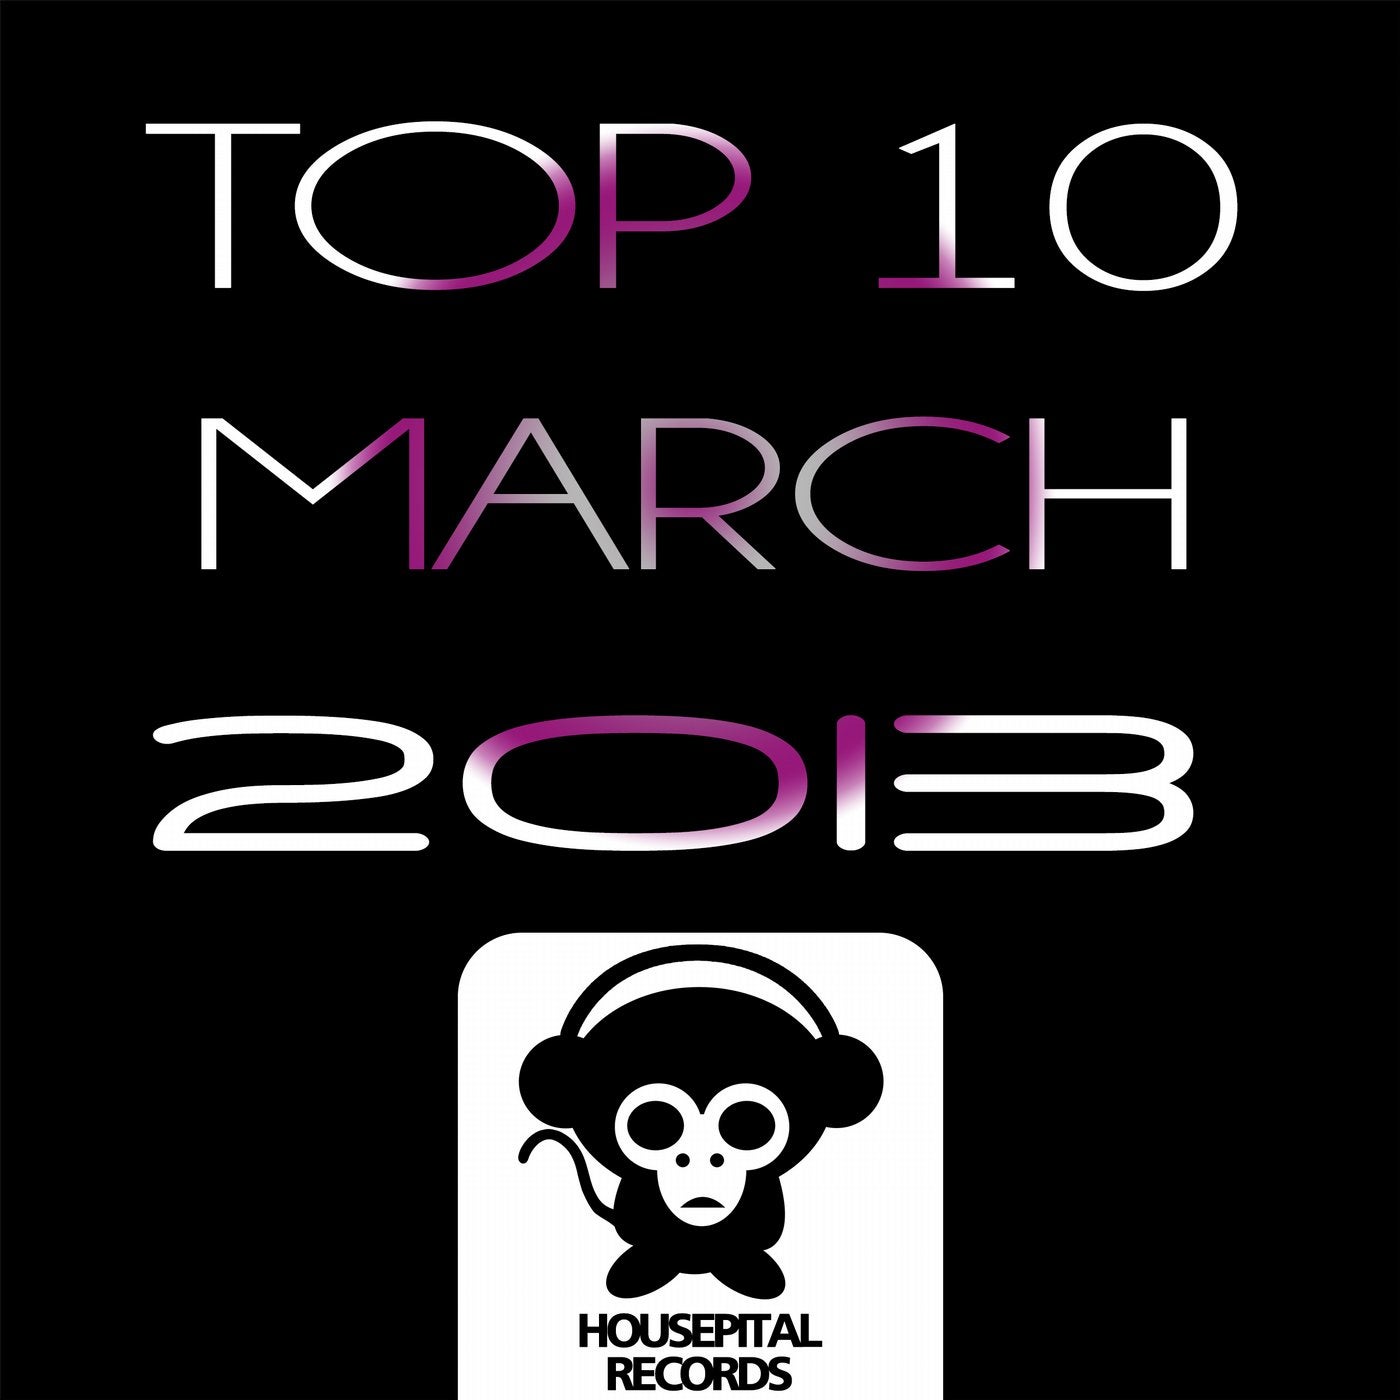 Top 10 March 2013